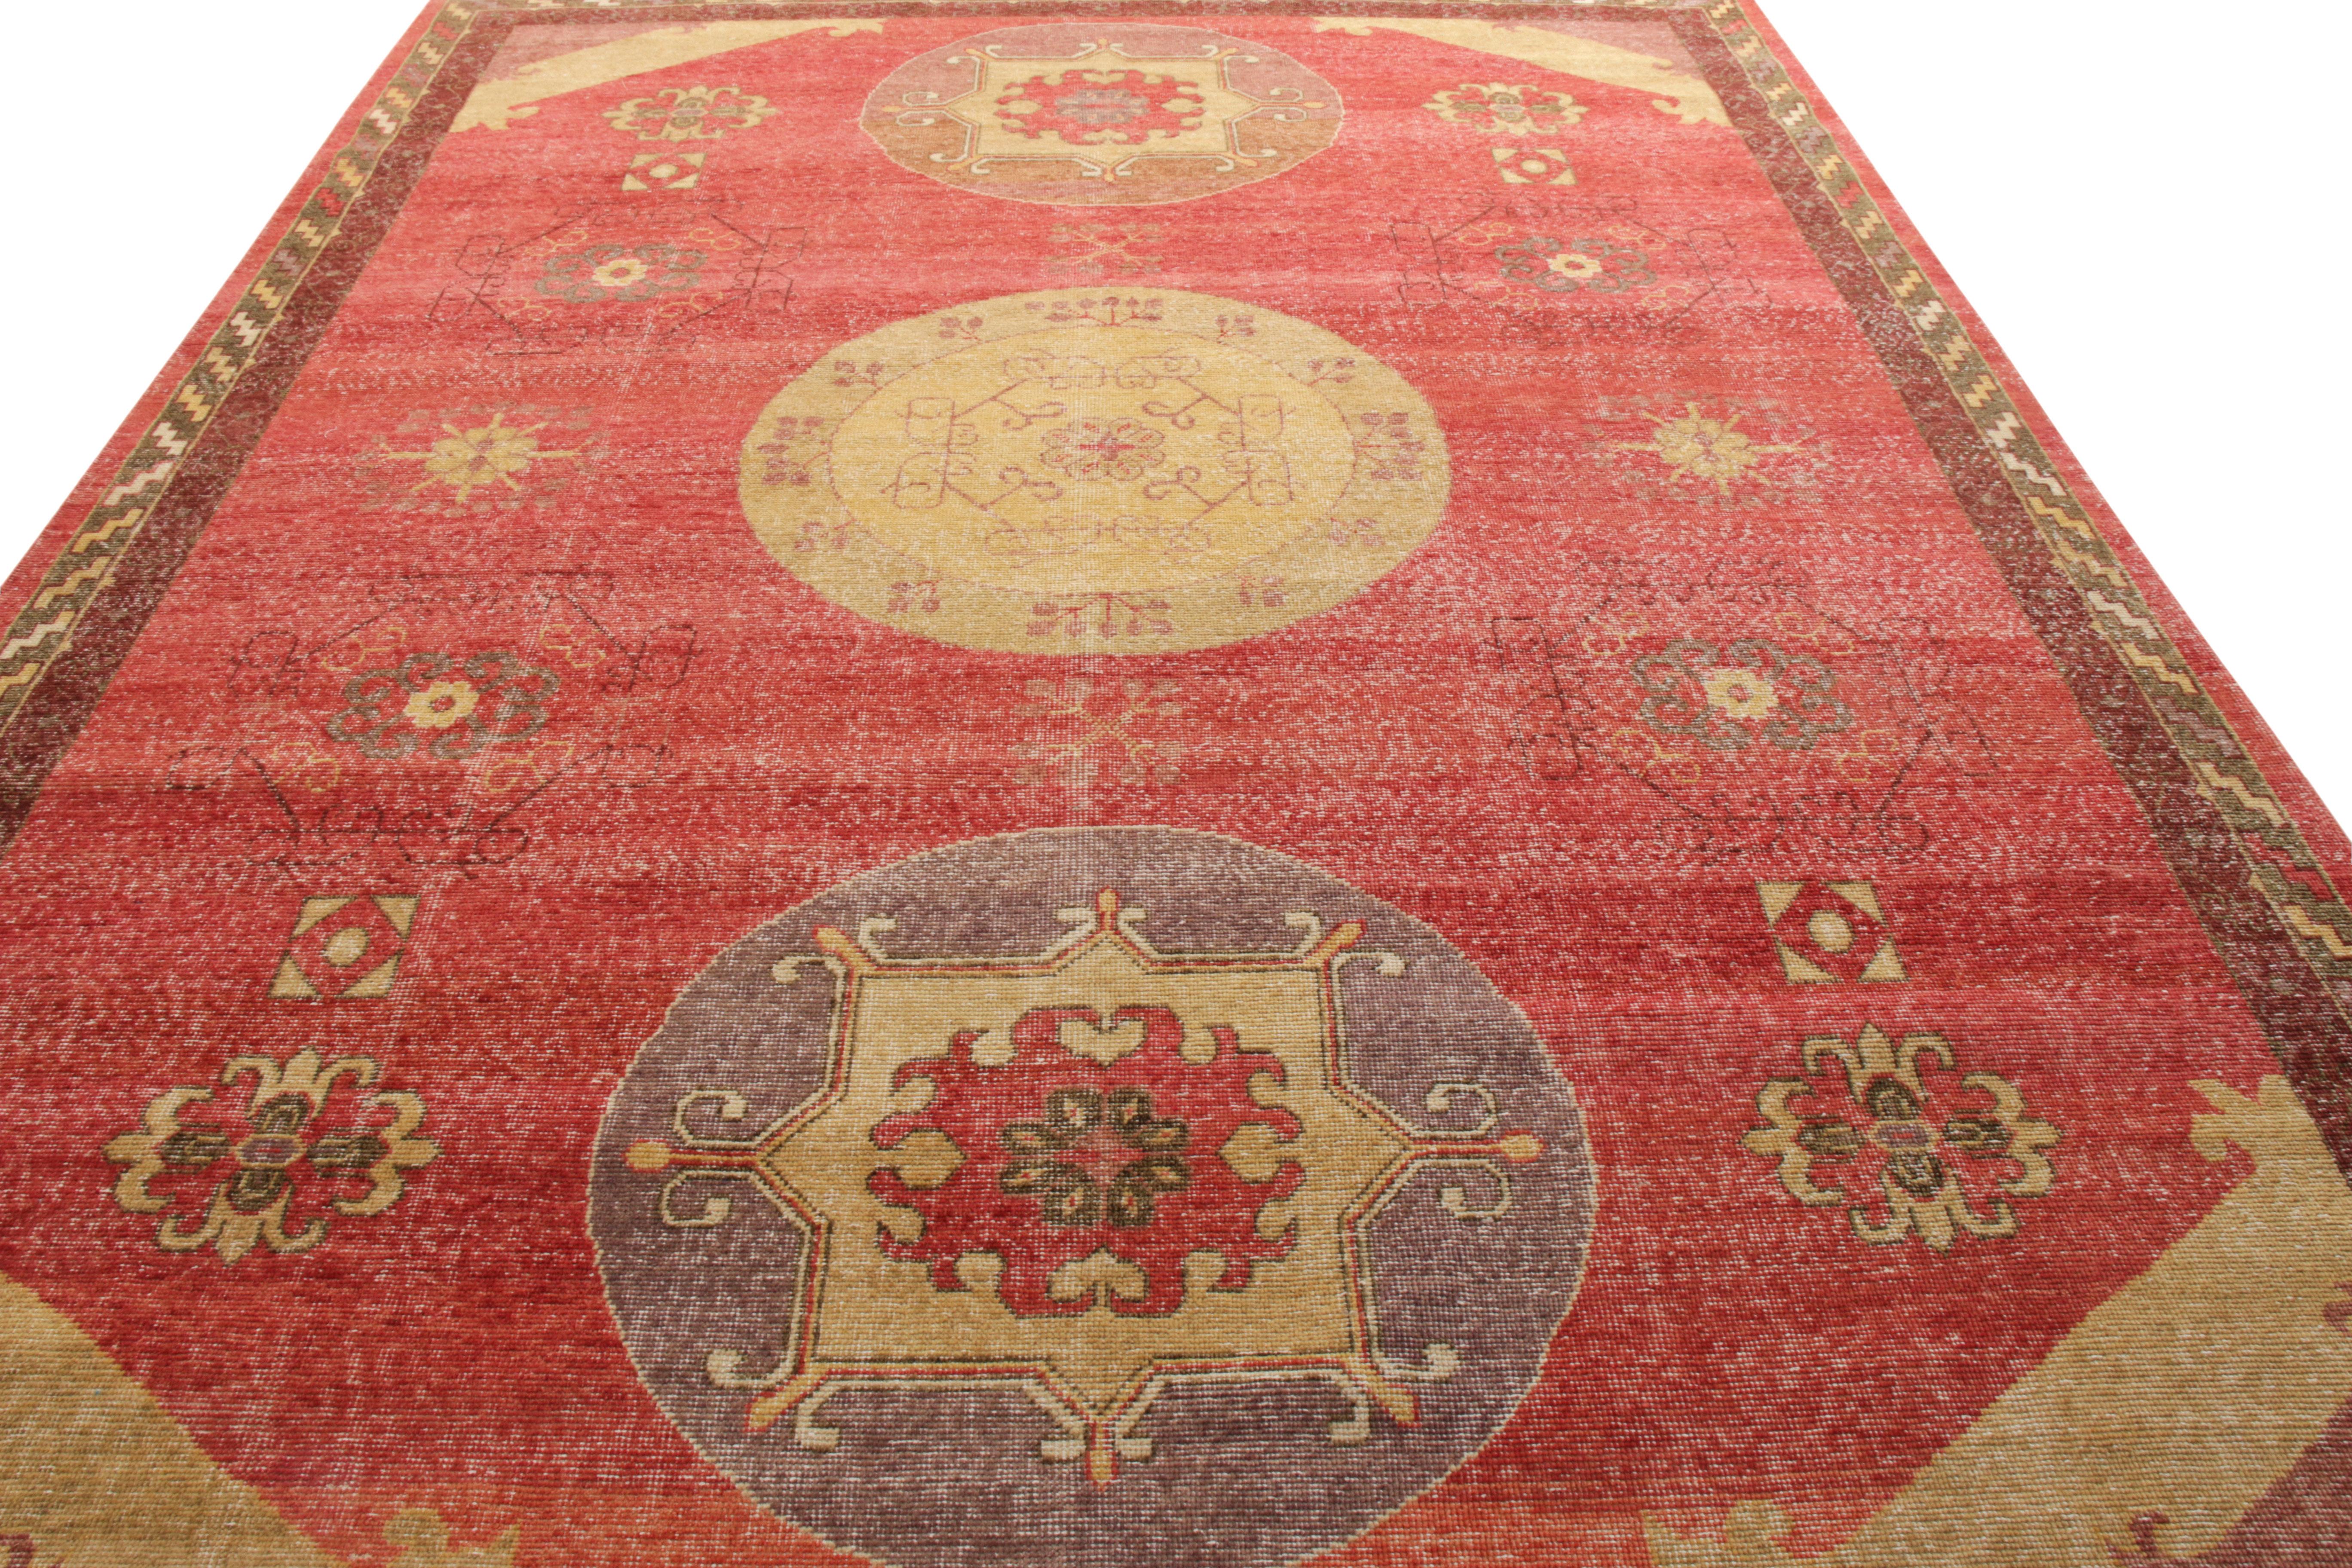 A rich hand knotted wool rug design from Rug & Kilim’s Homage Collection. Exemplified in this 9x12 edition, this distressed style rug witnesses a cheerful play of red and beige-gold tones gracefully complimenting the intricate medallion pattern on